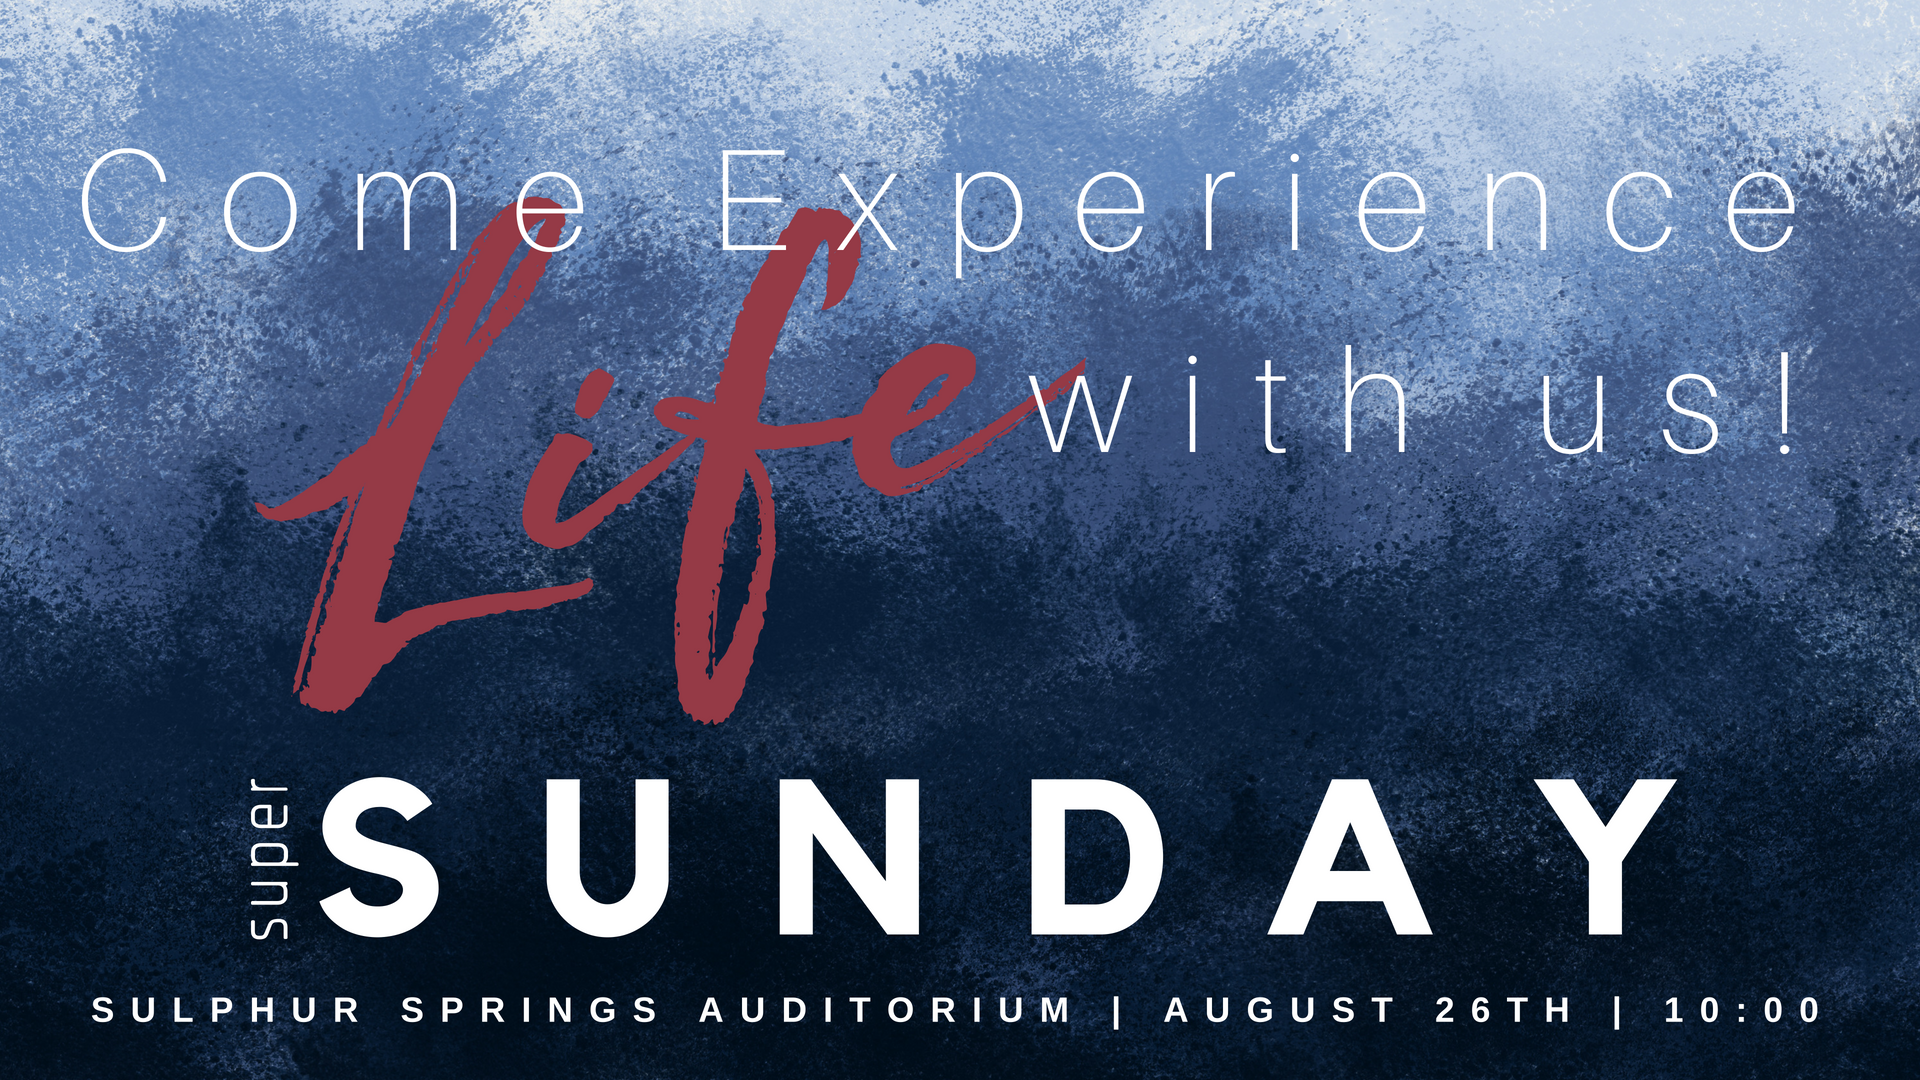 The Way Bible Church Hosting Super Sunday Service with Fun for The Whole Family at Civic Center Auditorium on Sunday